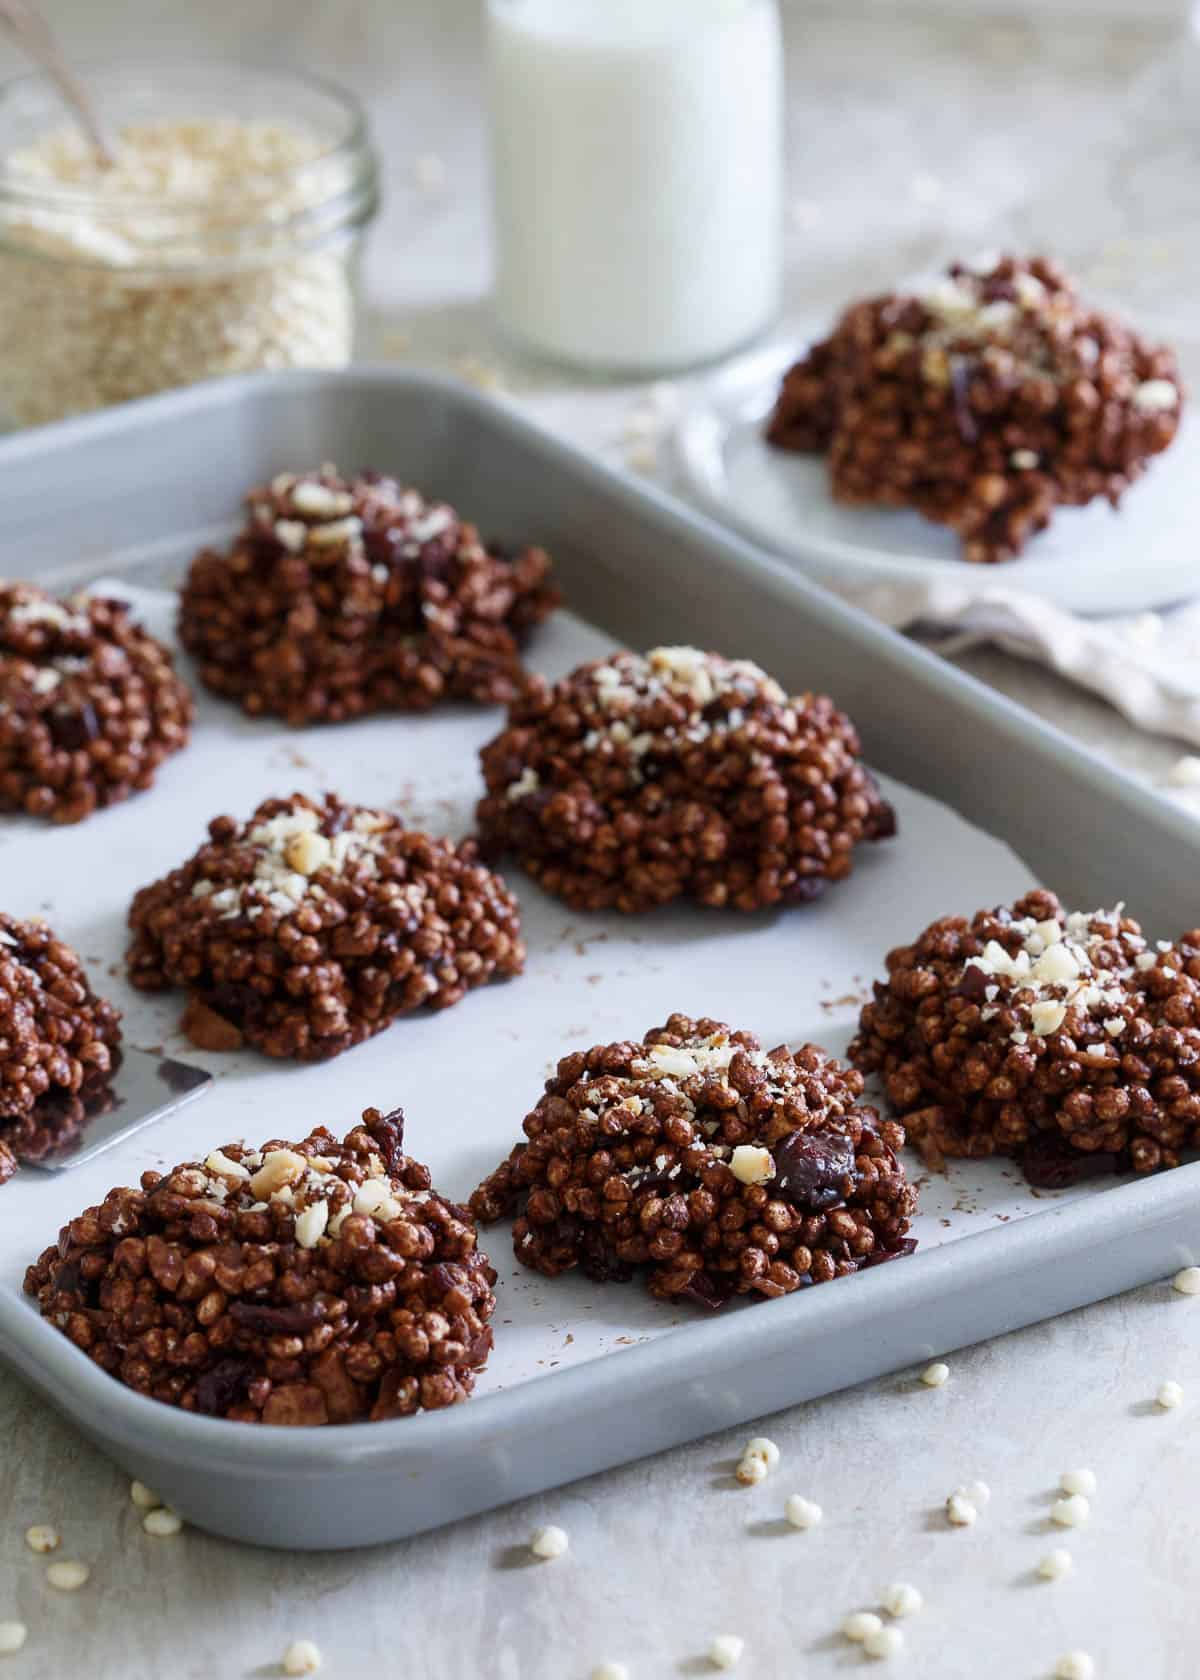 These puffed millet cookies are a no bake treat coated in dark chocolate and filled with dried cranberries and toasted macadamia nuts.